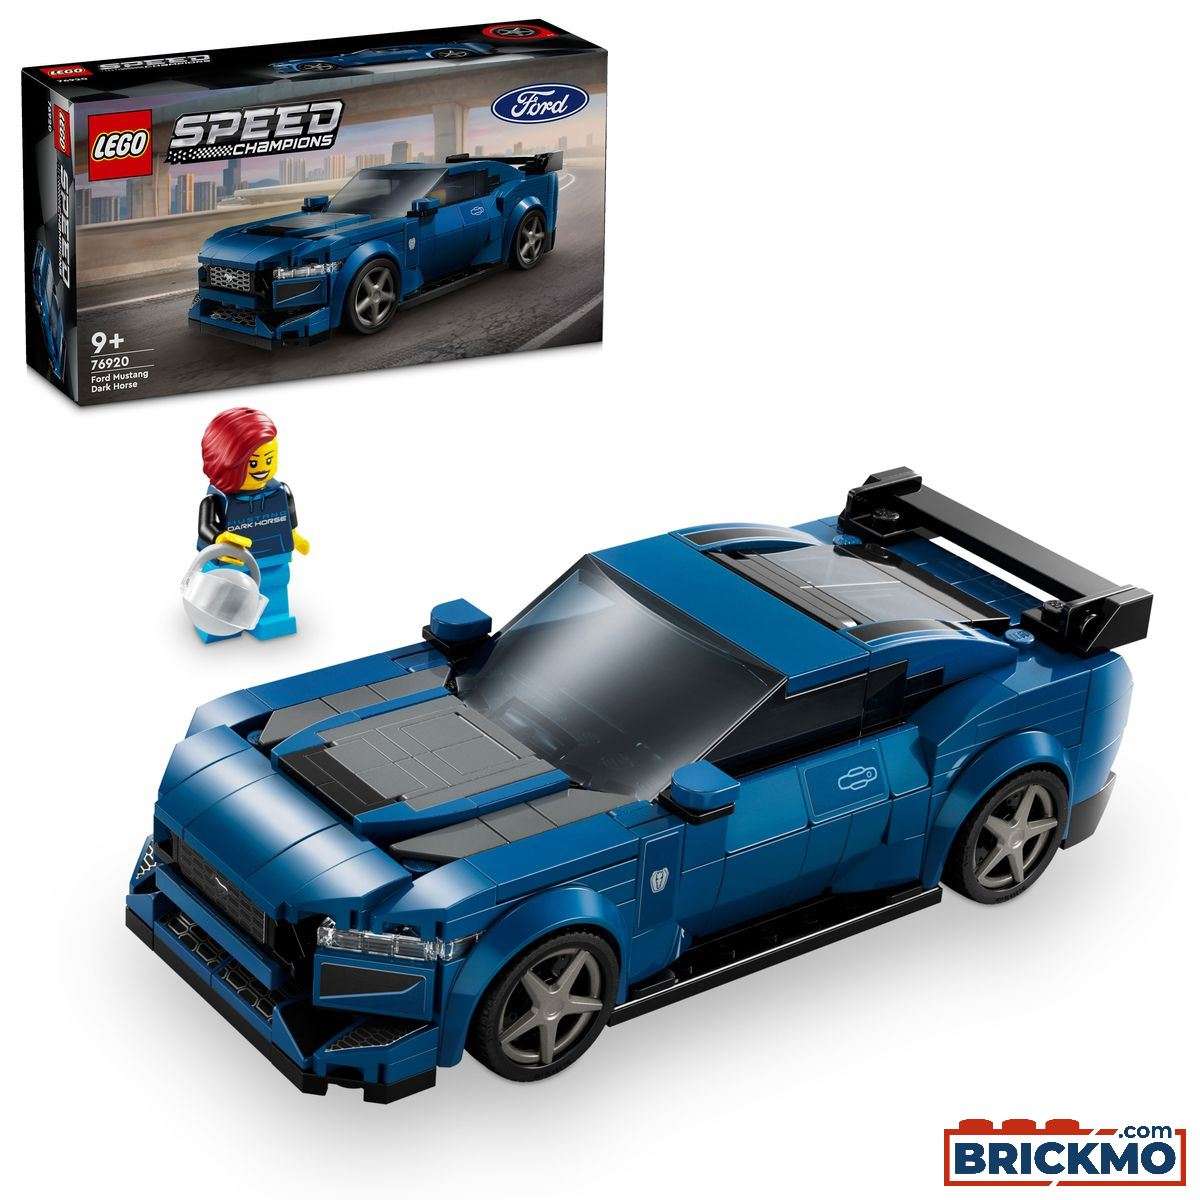 LEGO Speed Champions 76920 Auto sportiva Ford Mustang Dark Horse 76920